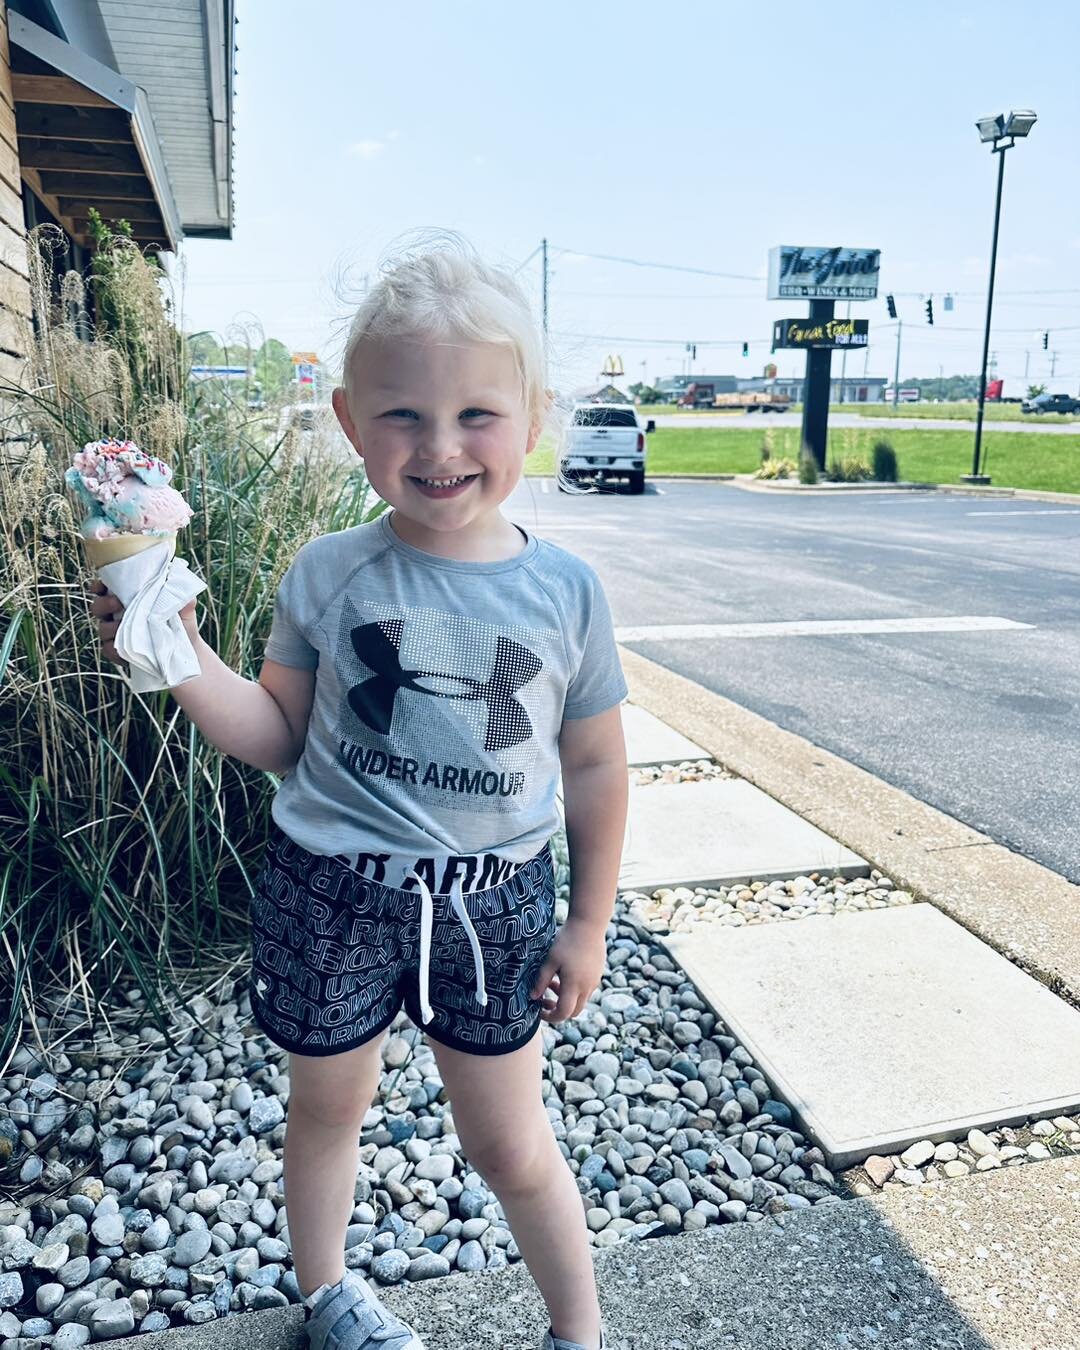 🍦Happy Sunday🍦
Emarie thinks everyone needs a scoop of Icecream on a cone today!

#thejointbbq #happysunday #icecream